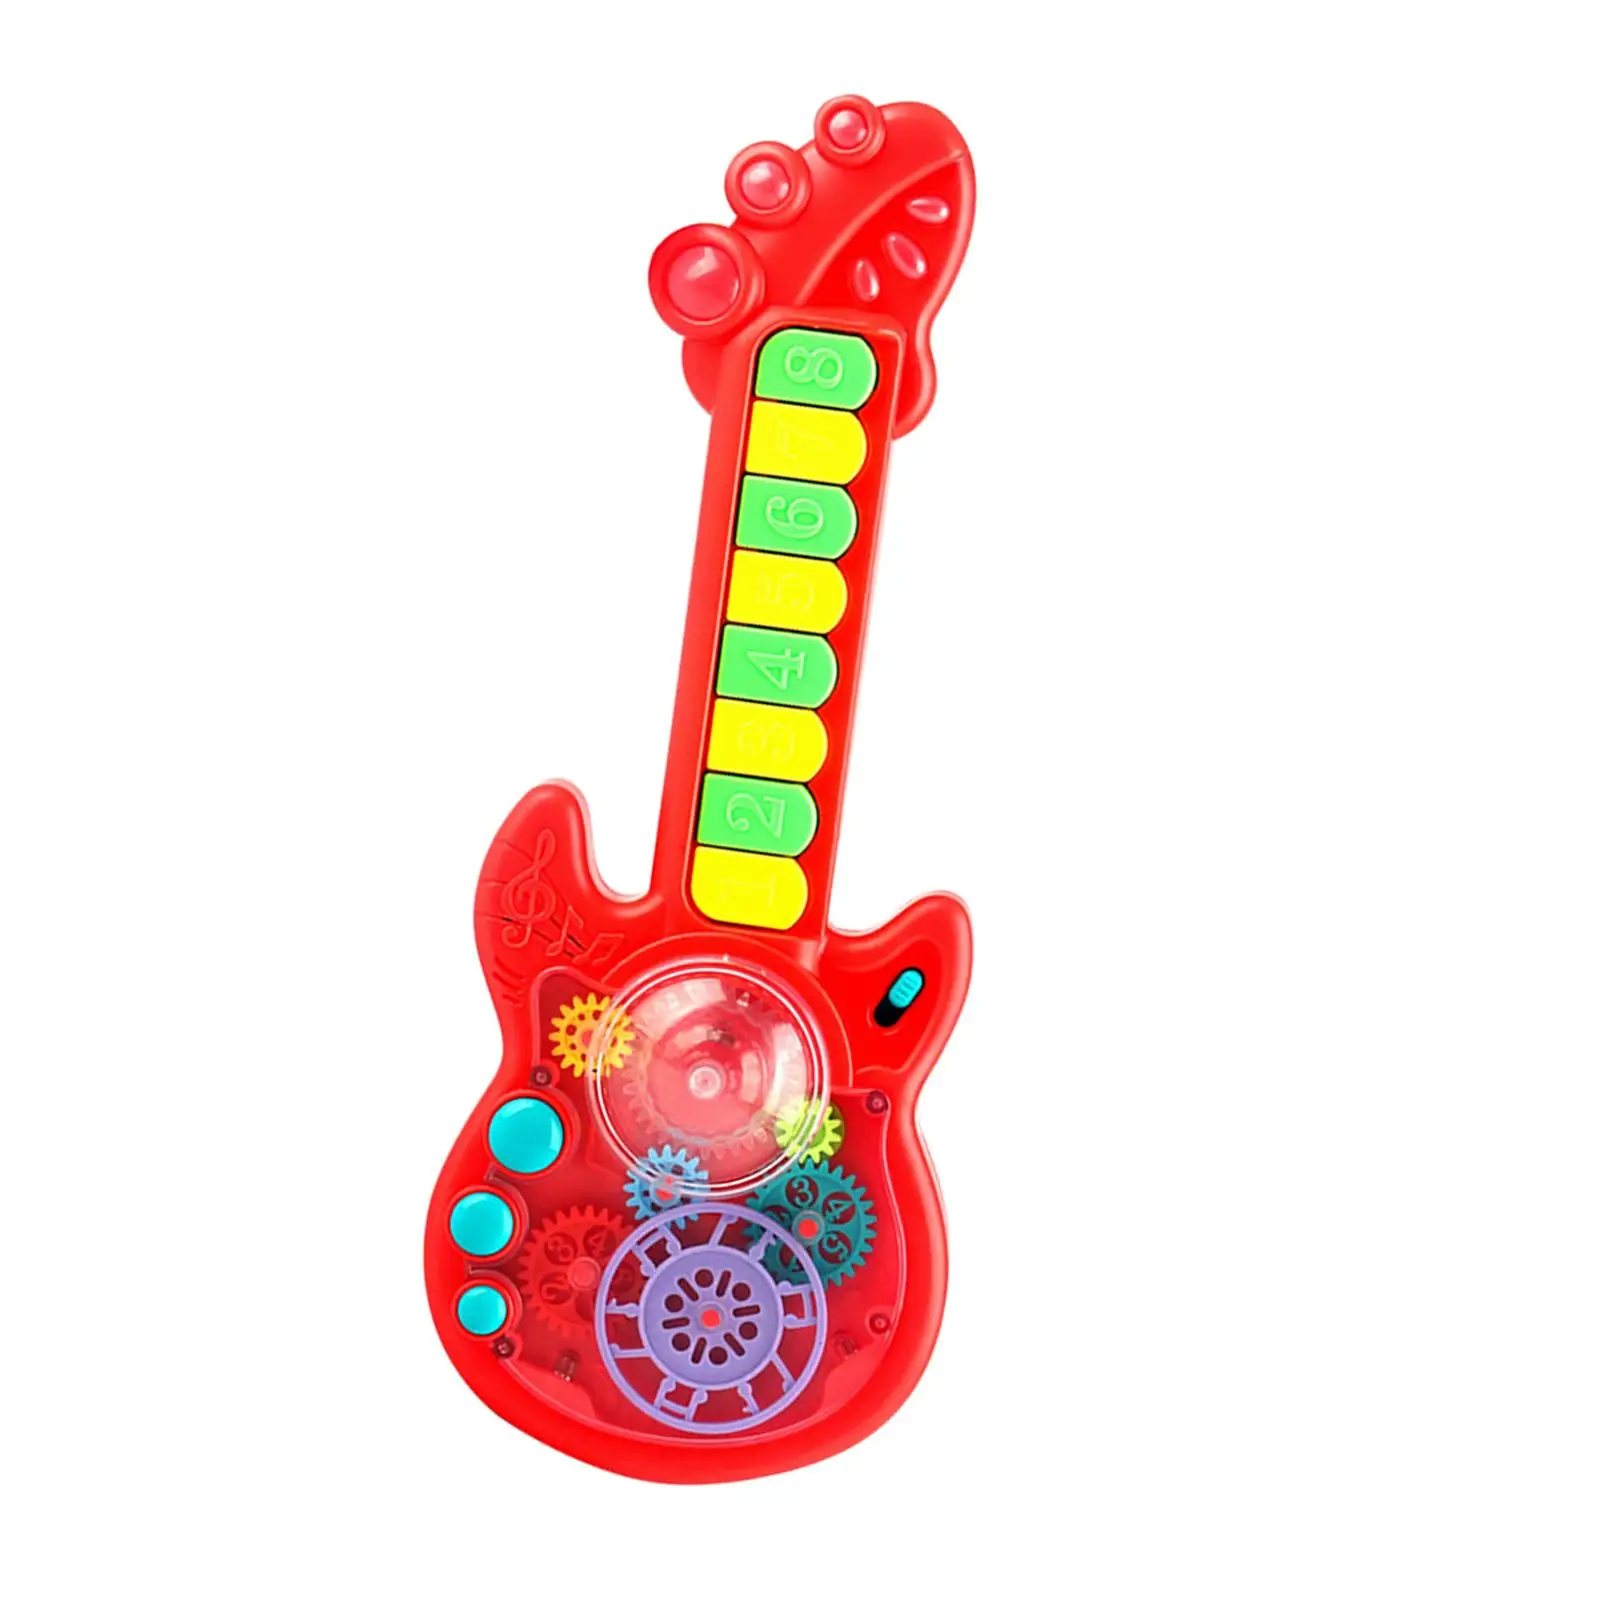 Eight Key Switches musical Guitar with Lanyard Soft Music Educational Sound Interactive Electronic Toy Guitar for gift